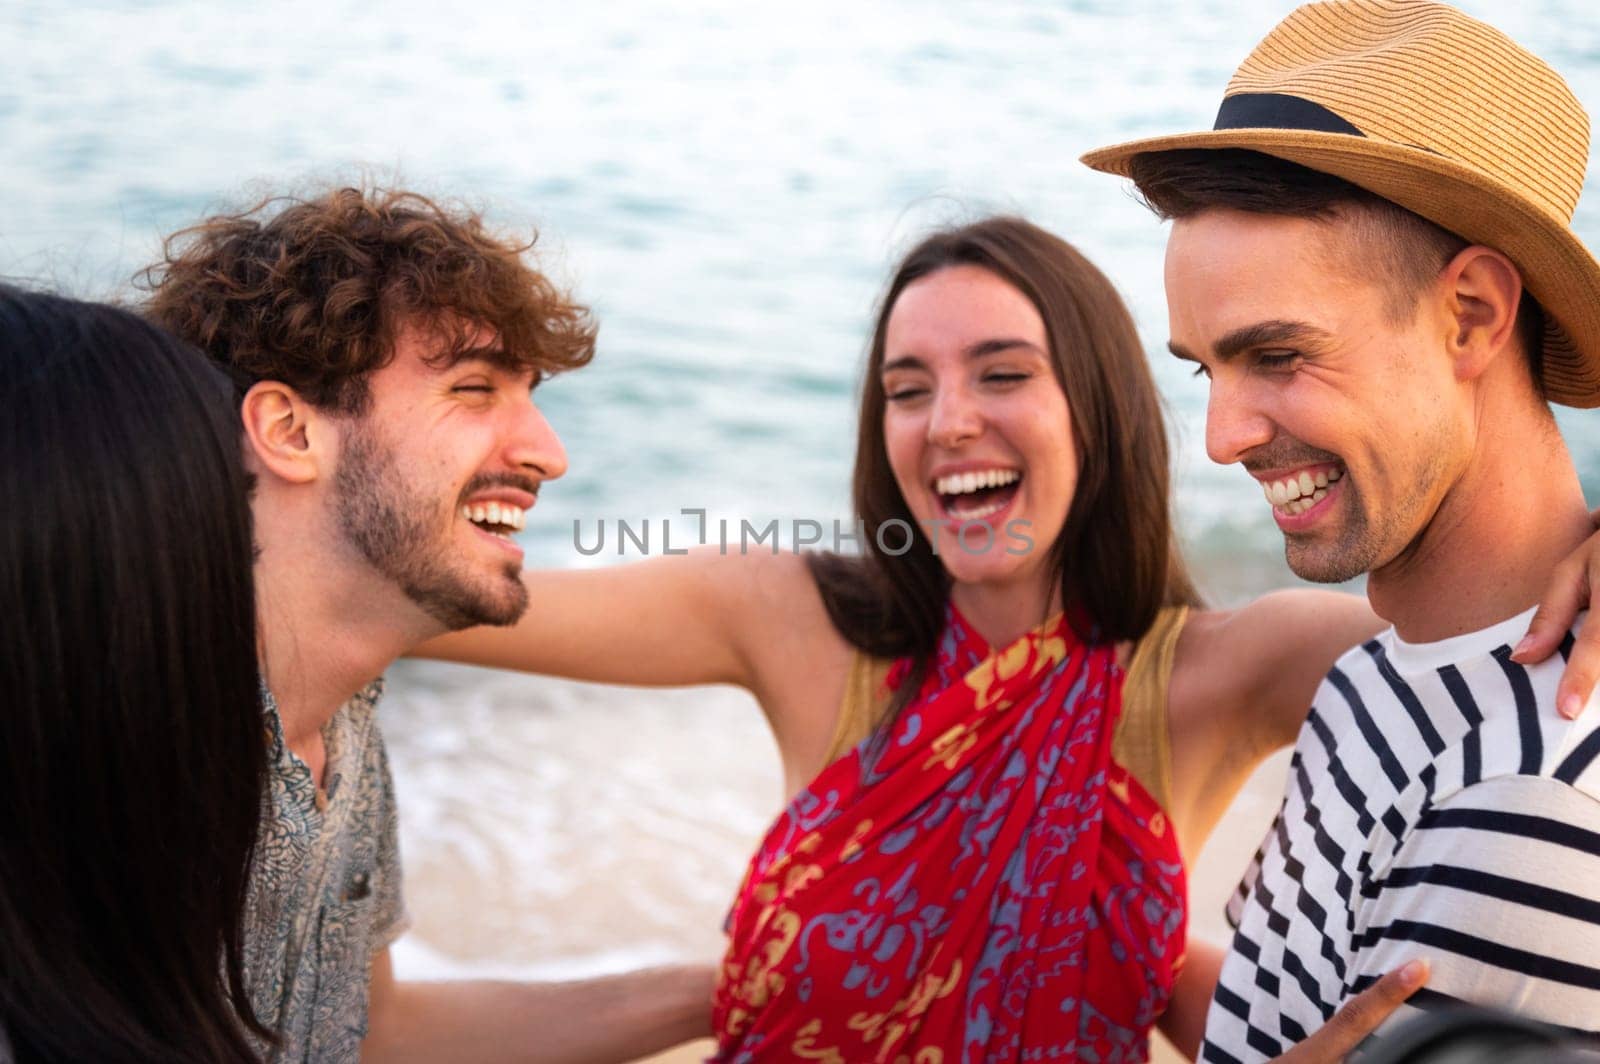 Group of friends laugh together embracing at the beach. Friendship and summer vacations by Hoverstock